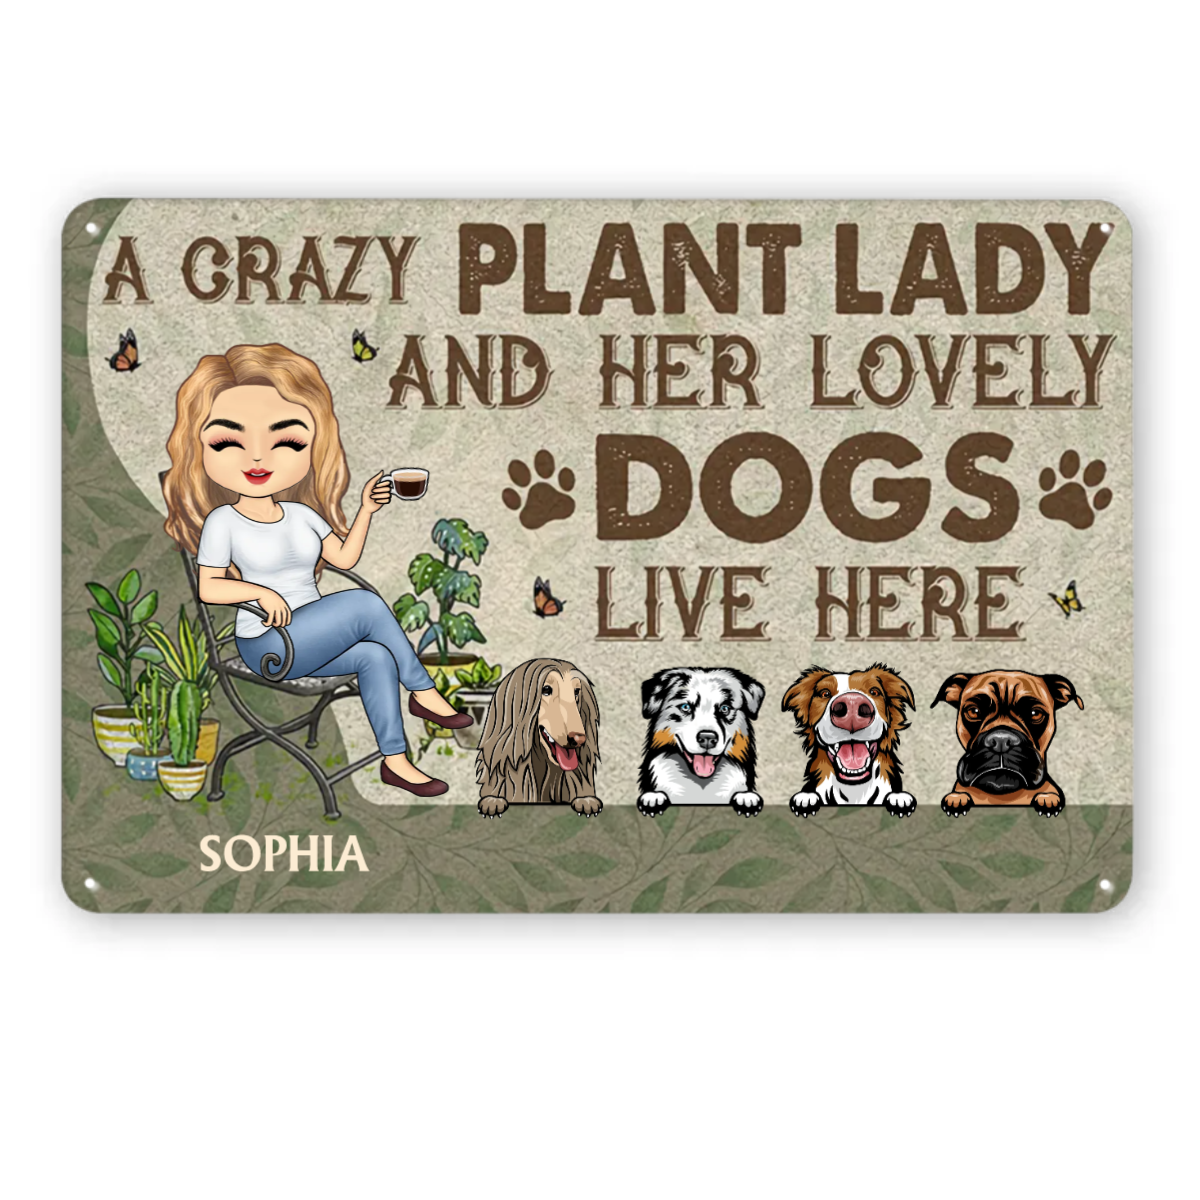 A Crazy Plant Lady And Her Lovely Dogs Live Here - ガーデニング愛好家へのギフト - パーソナライズされたカスタムメタルサイン